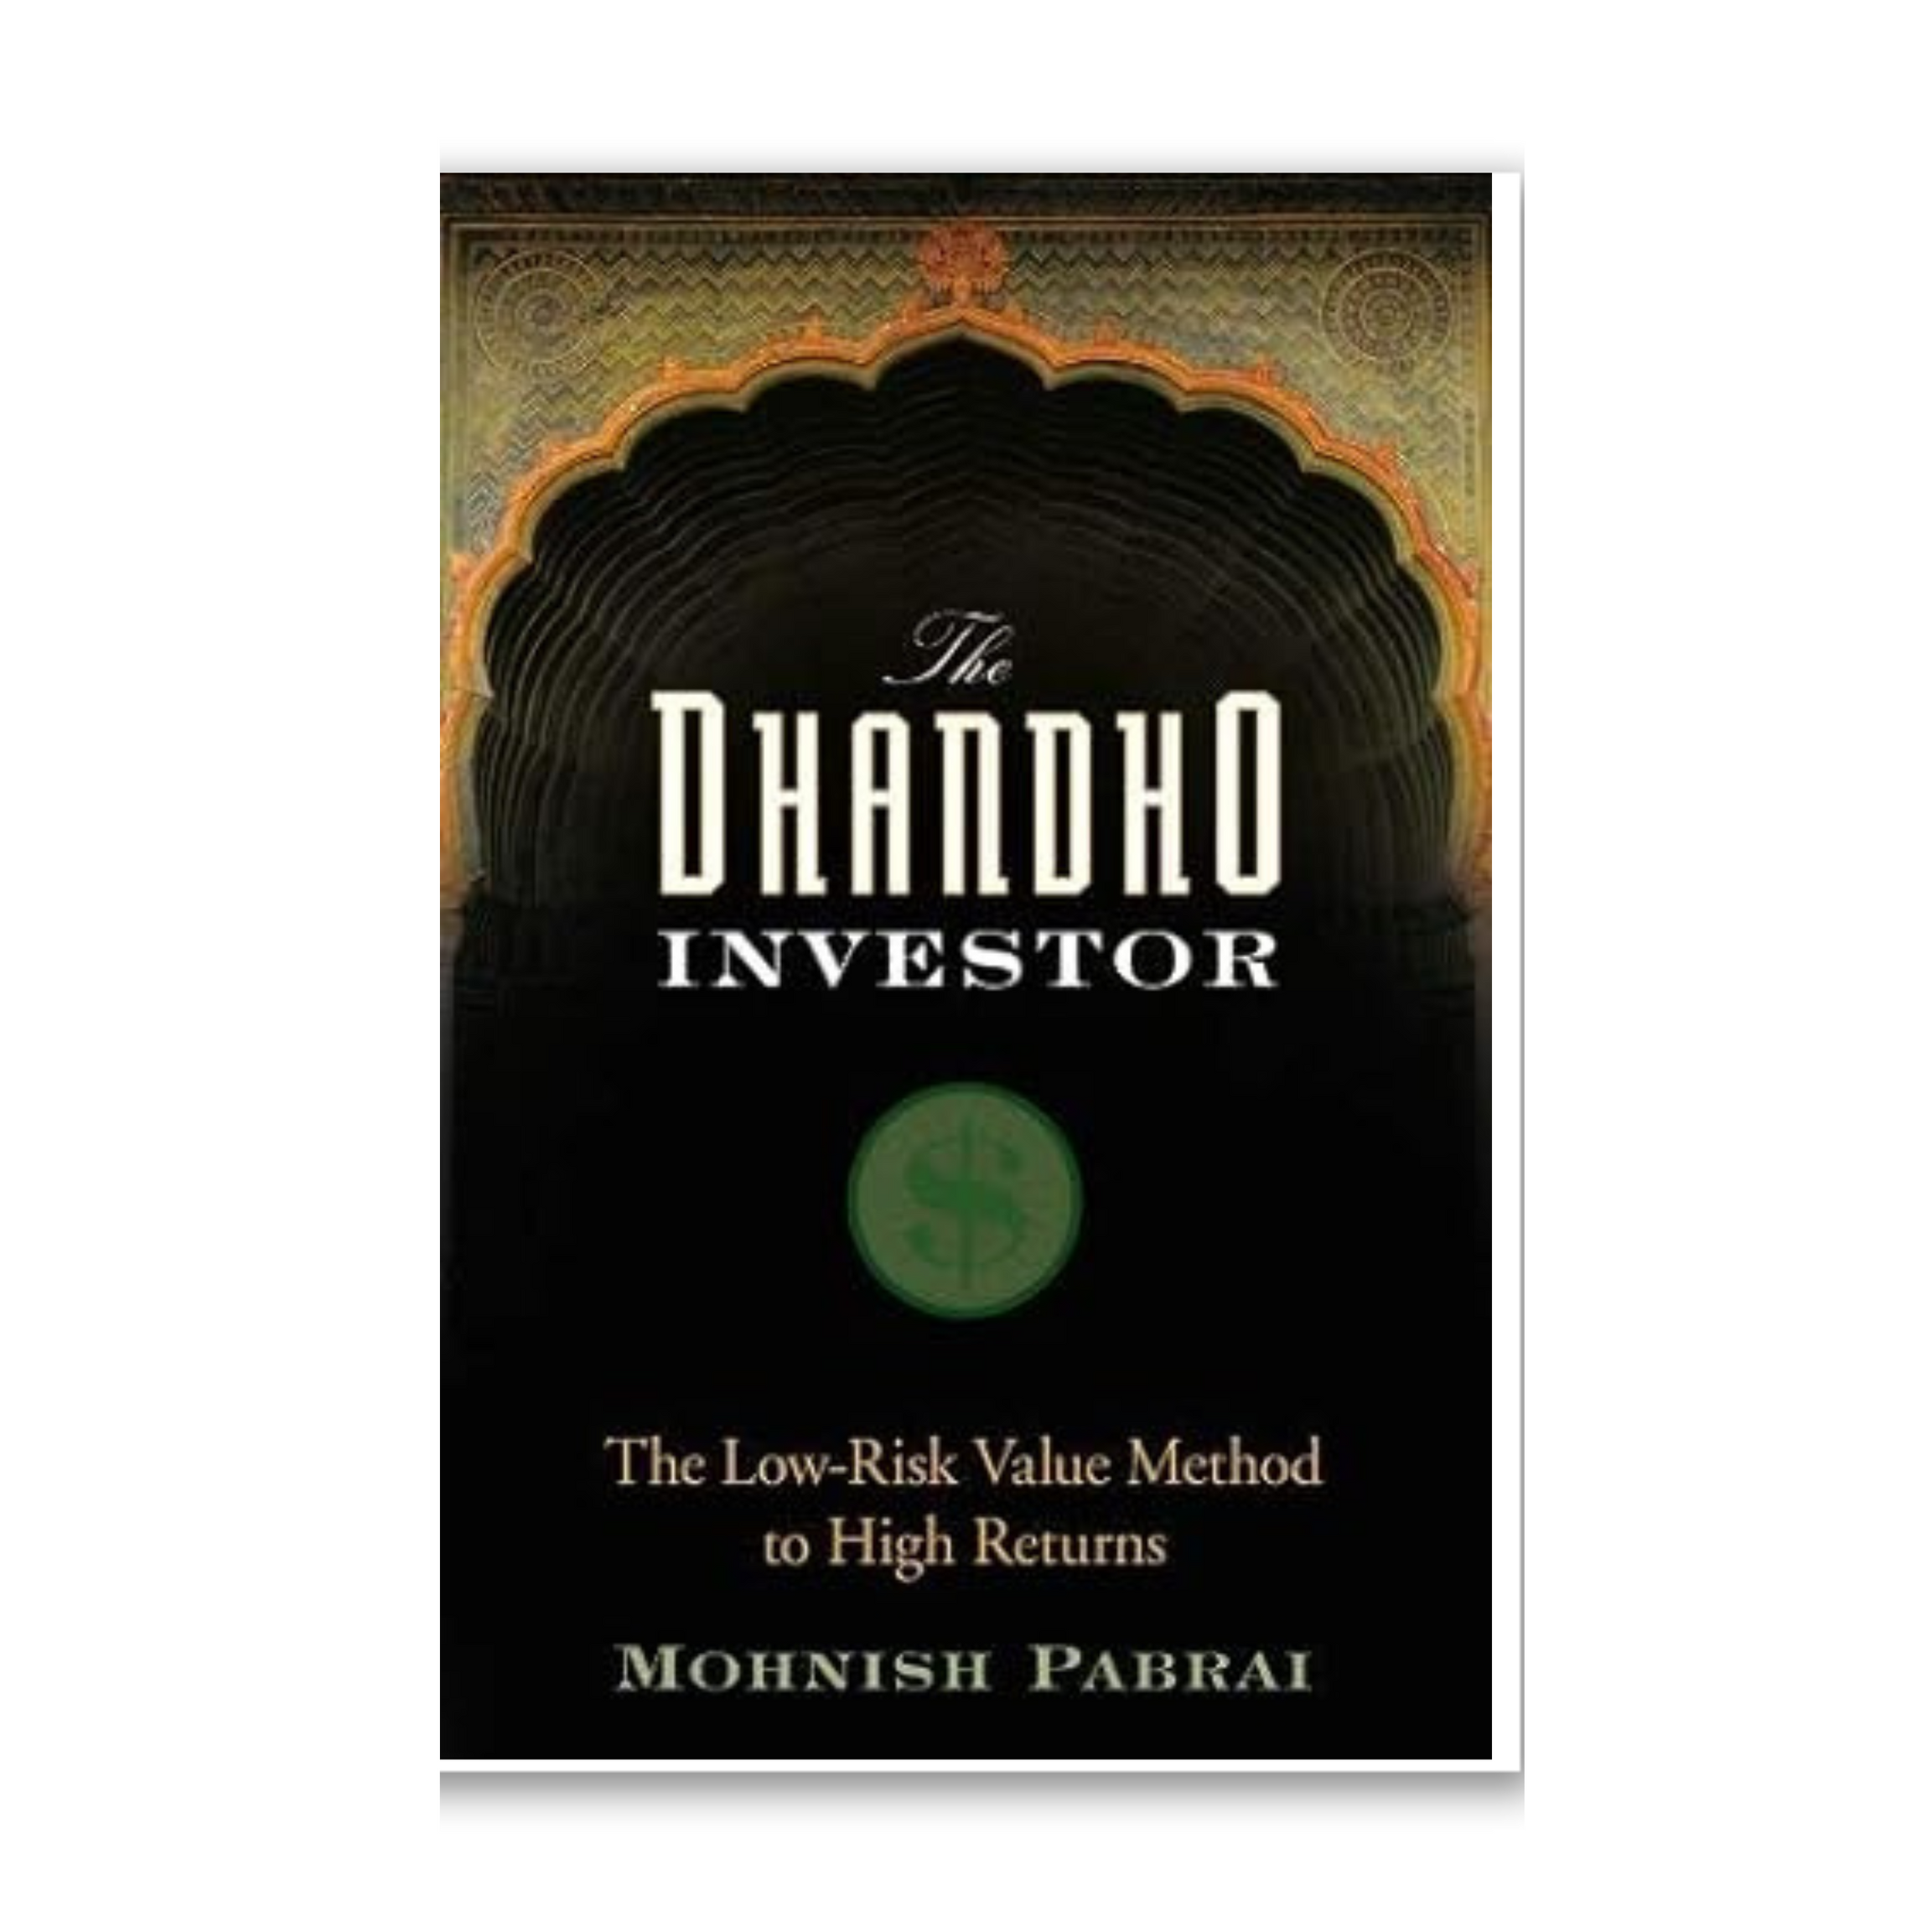 The Dhando Investor